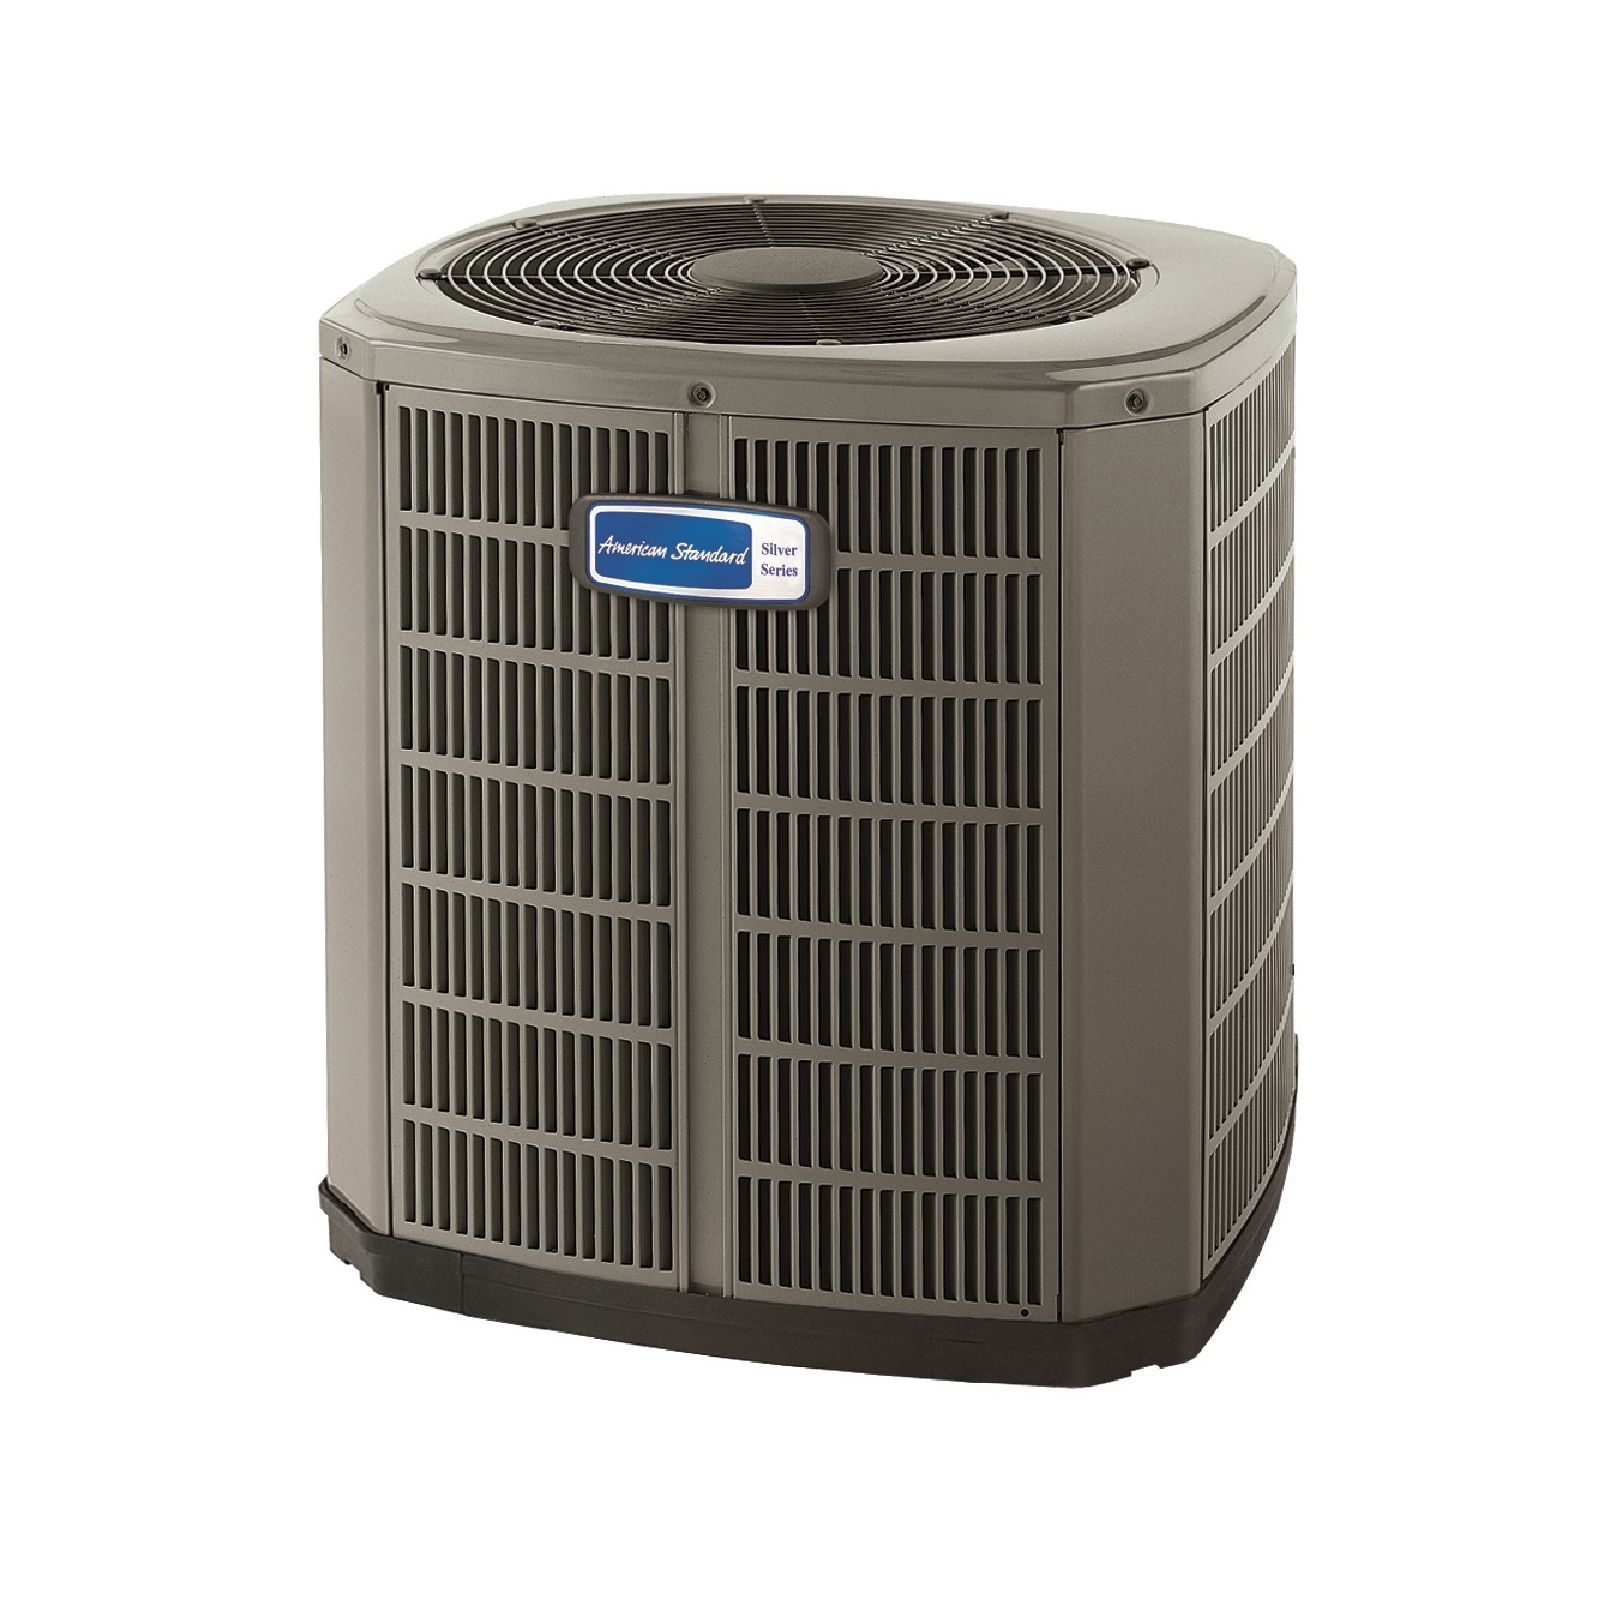 American Standard Heating & Cooling 2.5 Ton Air Conditioner 1874412